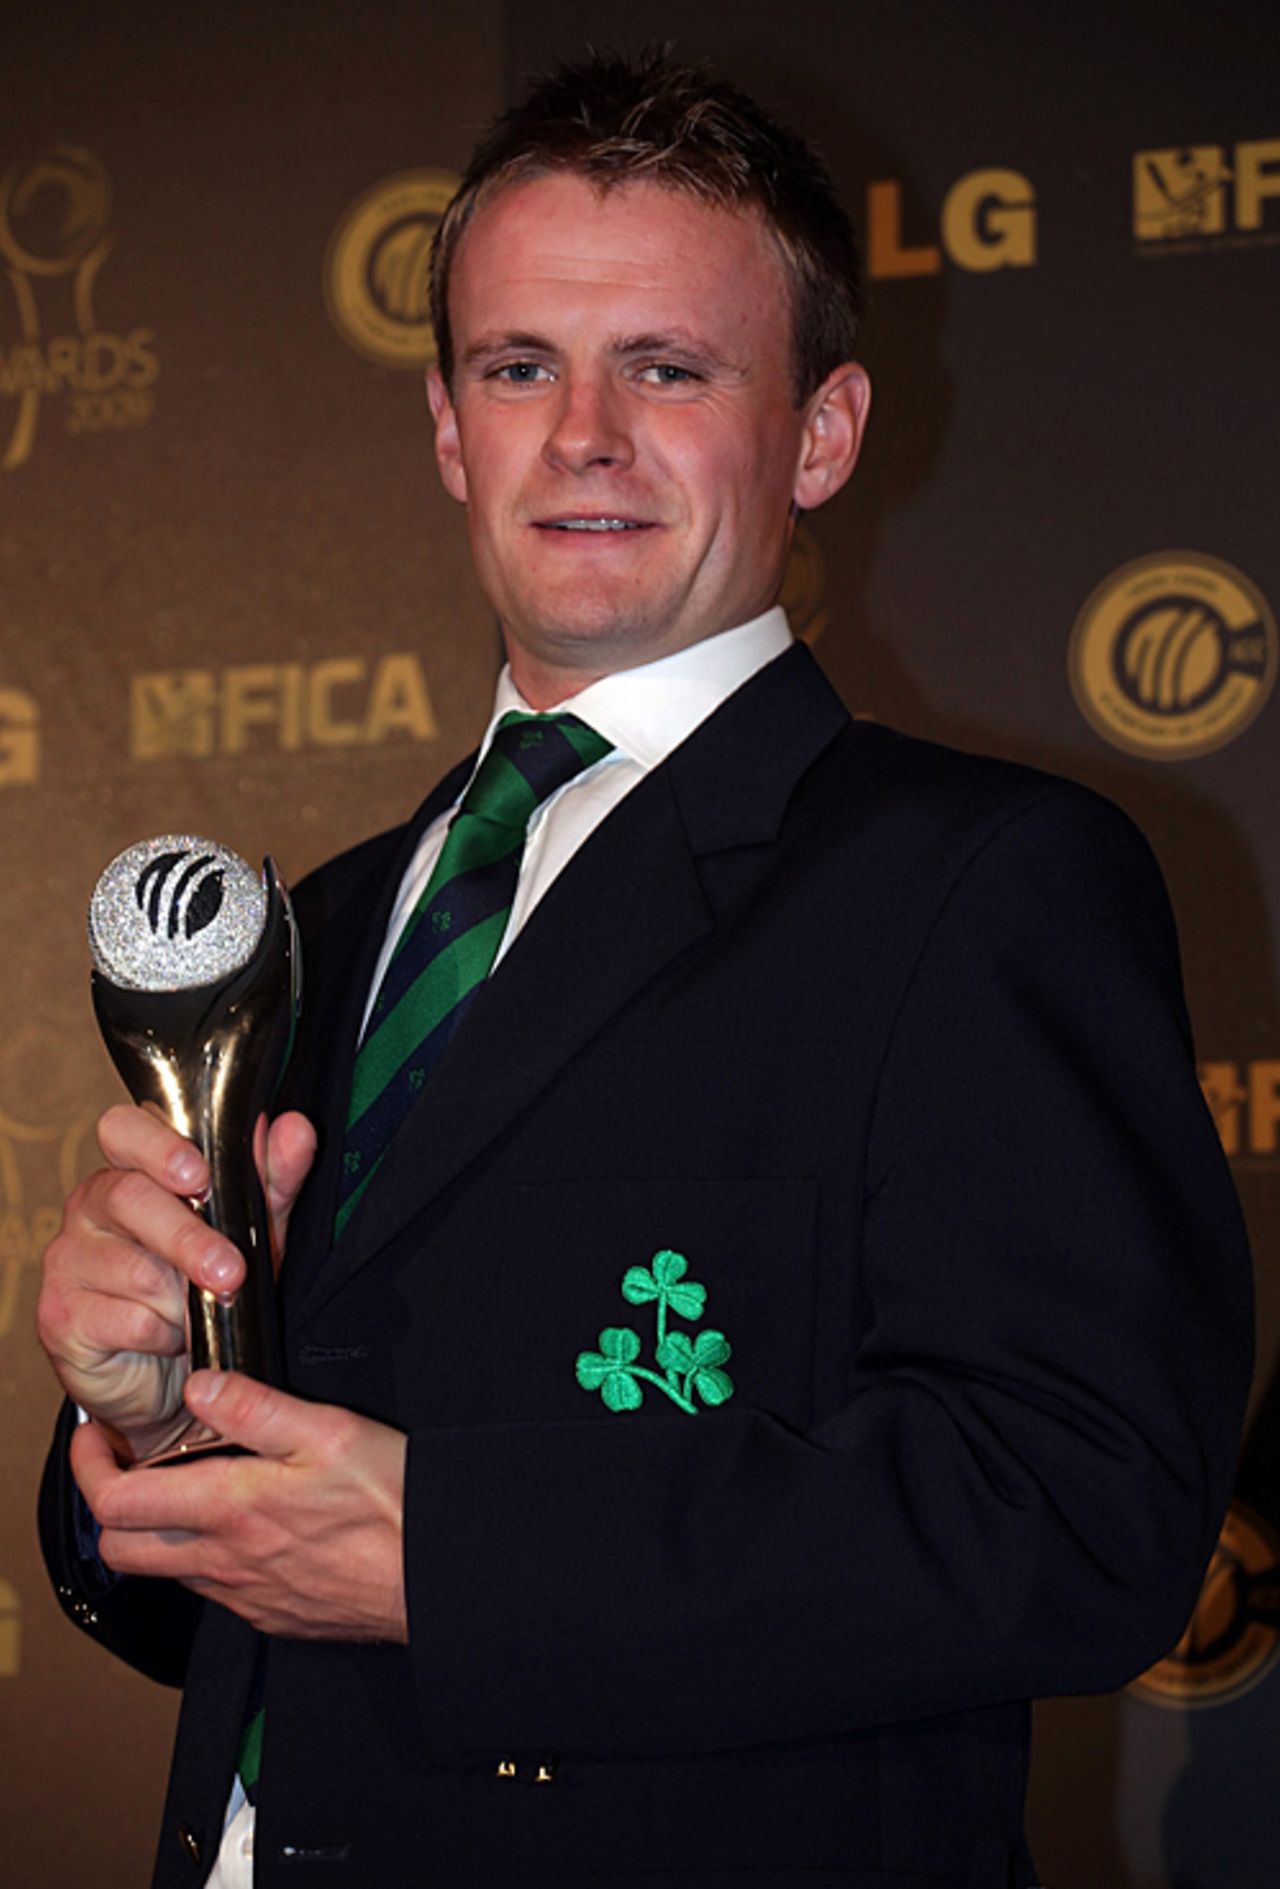 William Porterfield with the Associate Player of the Year trophy, ICC Awards, Johannesburg, October 1, 2009